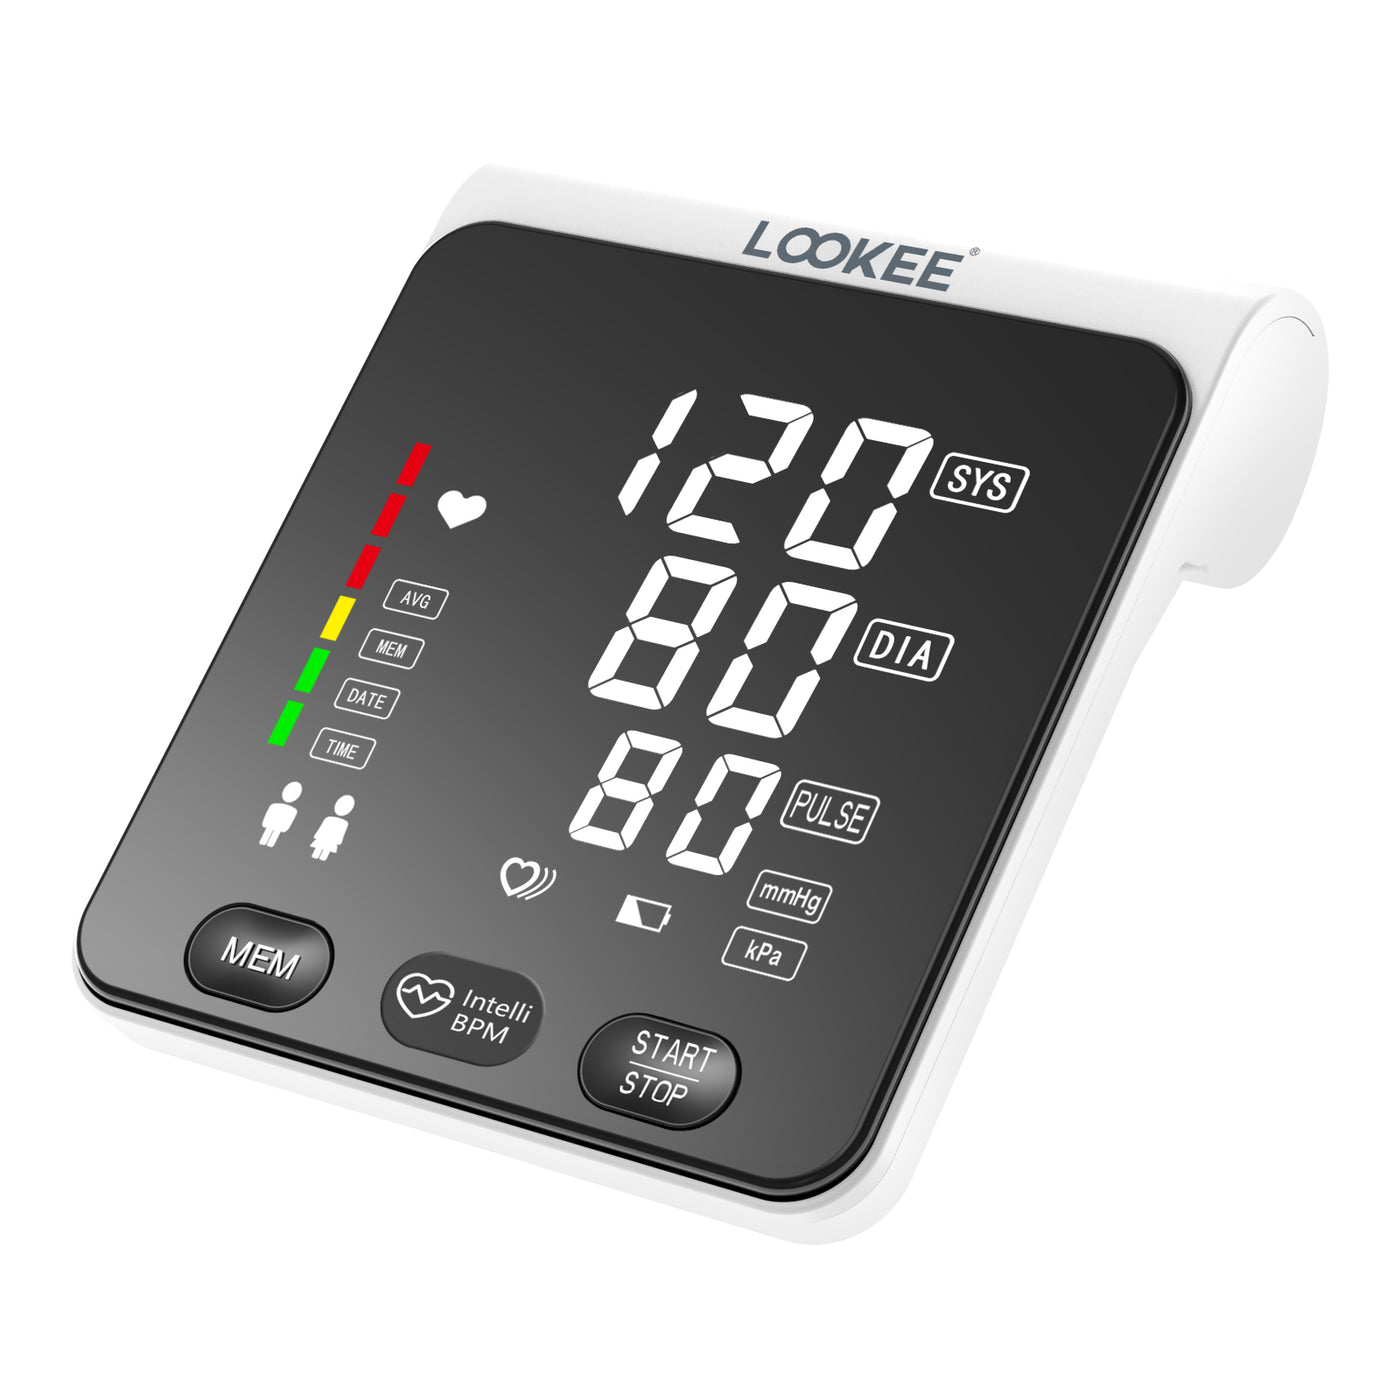 FDA Approved Upper Arm Blood Pressure Monitor